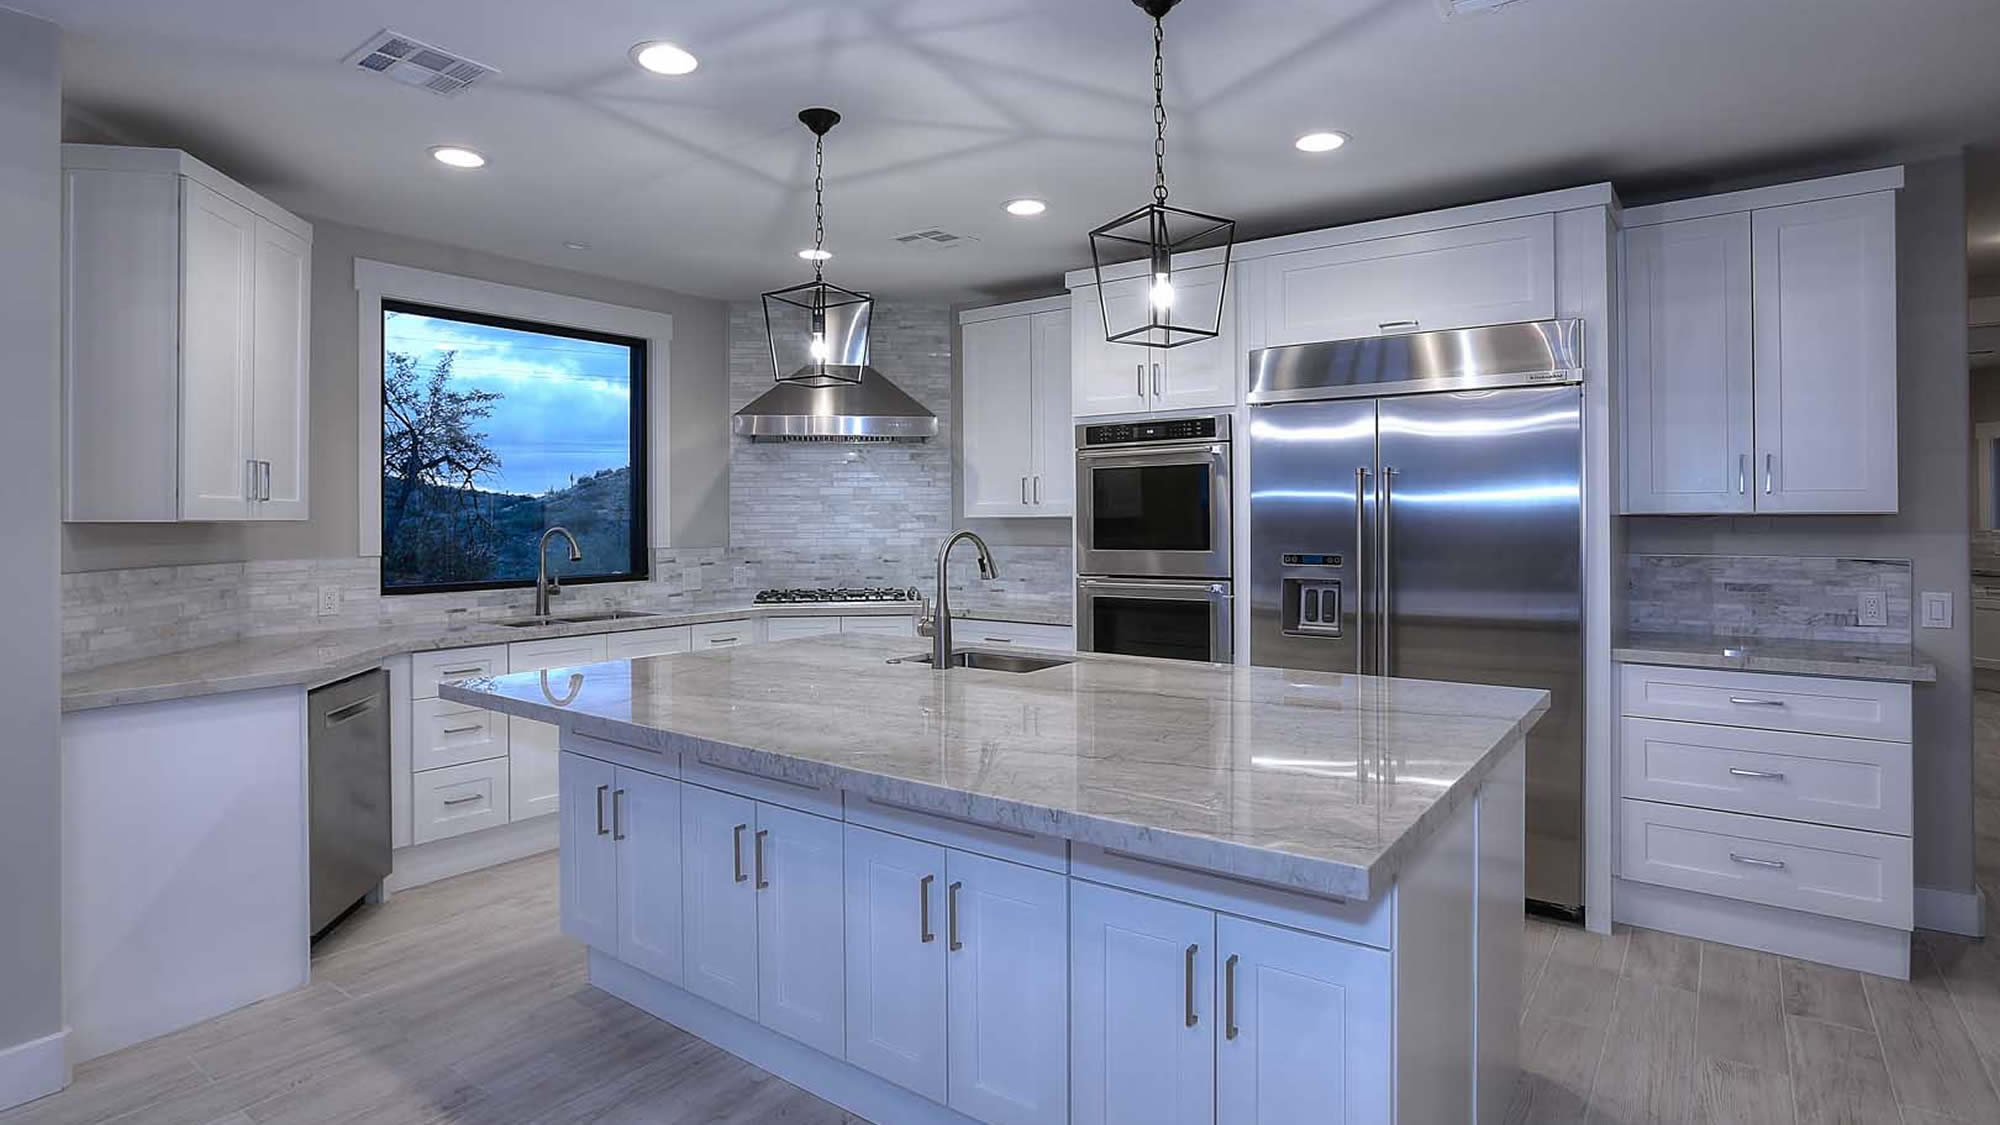 Complete Kitchen remodel by HS3 Construction in Foutnain Hills AZ